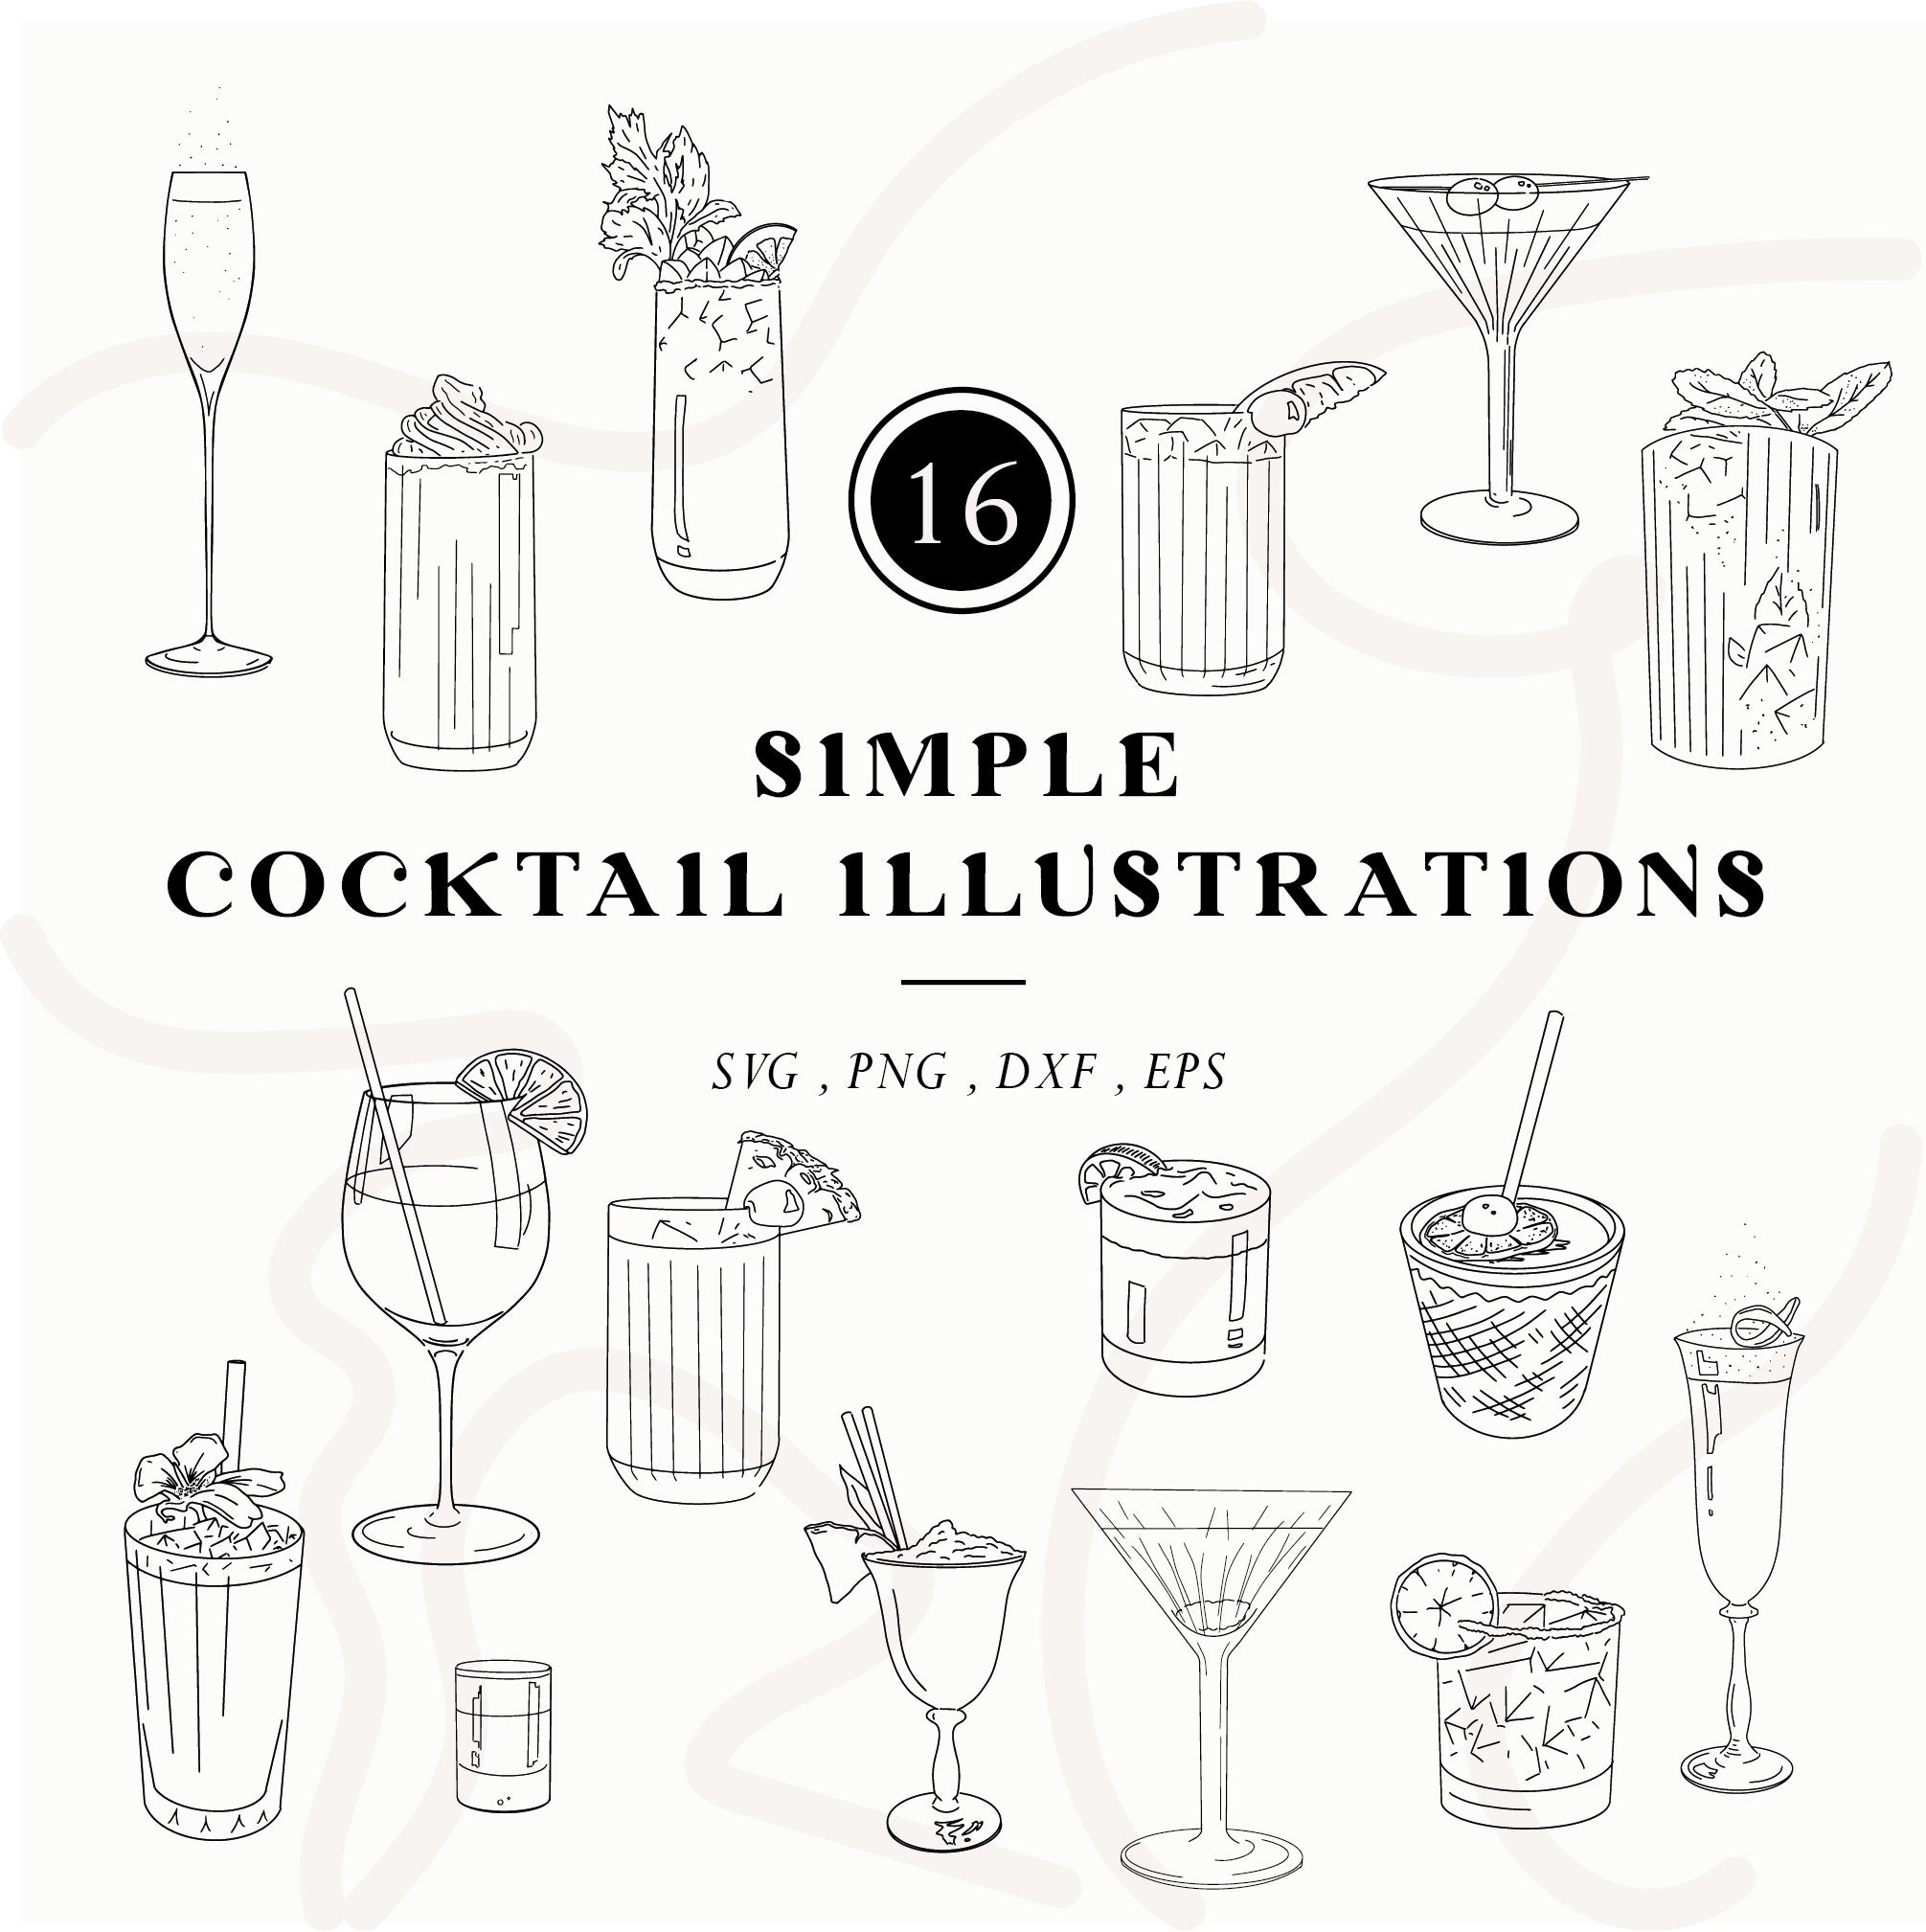 Hiring] custom cocktail drawing vector in the style of attached images. 2  cocktails. $50-$75 : r/HungryArtists